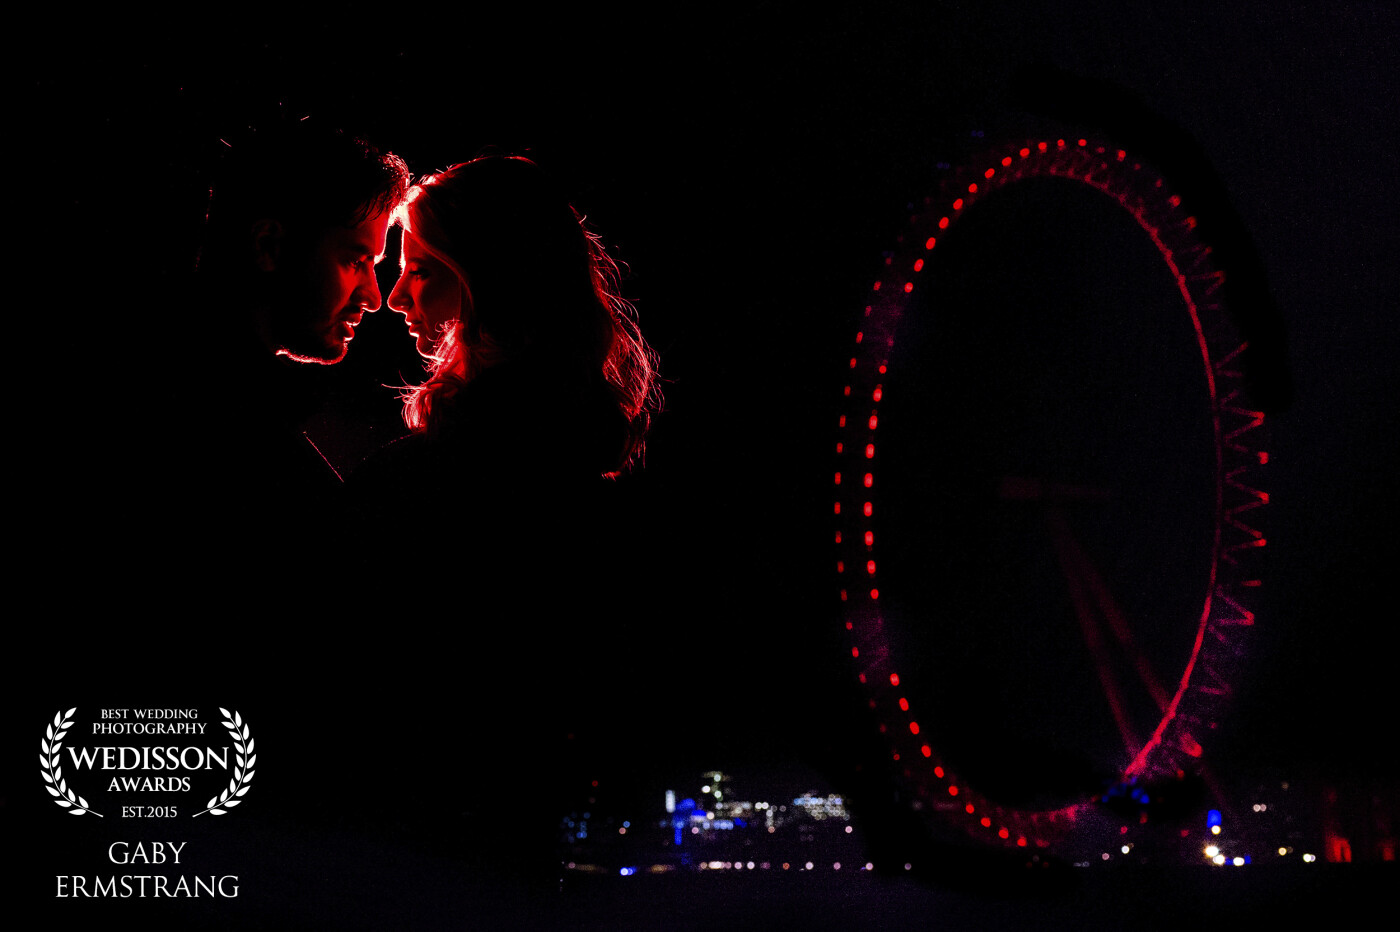 With a destination loveshoot all the way in London. <br />
They loved the London Eye, and so I did photograph them in front of the London Eye with alle kinds of lights and triggers. <br />
<br />
I also fell in love with London AND this couple <3